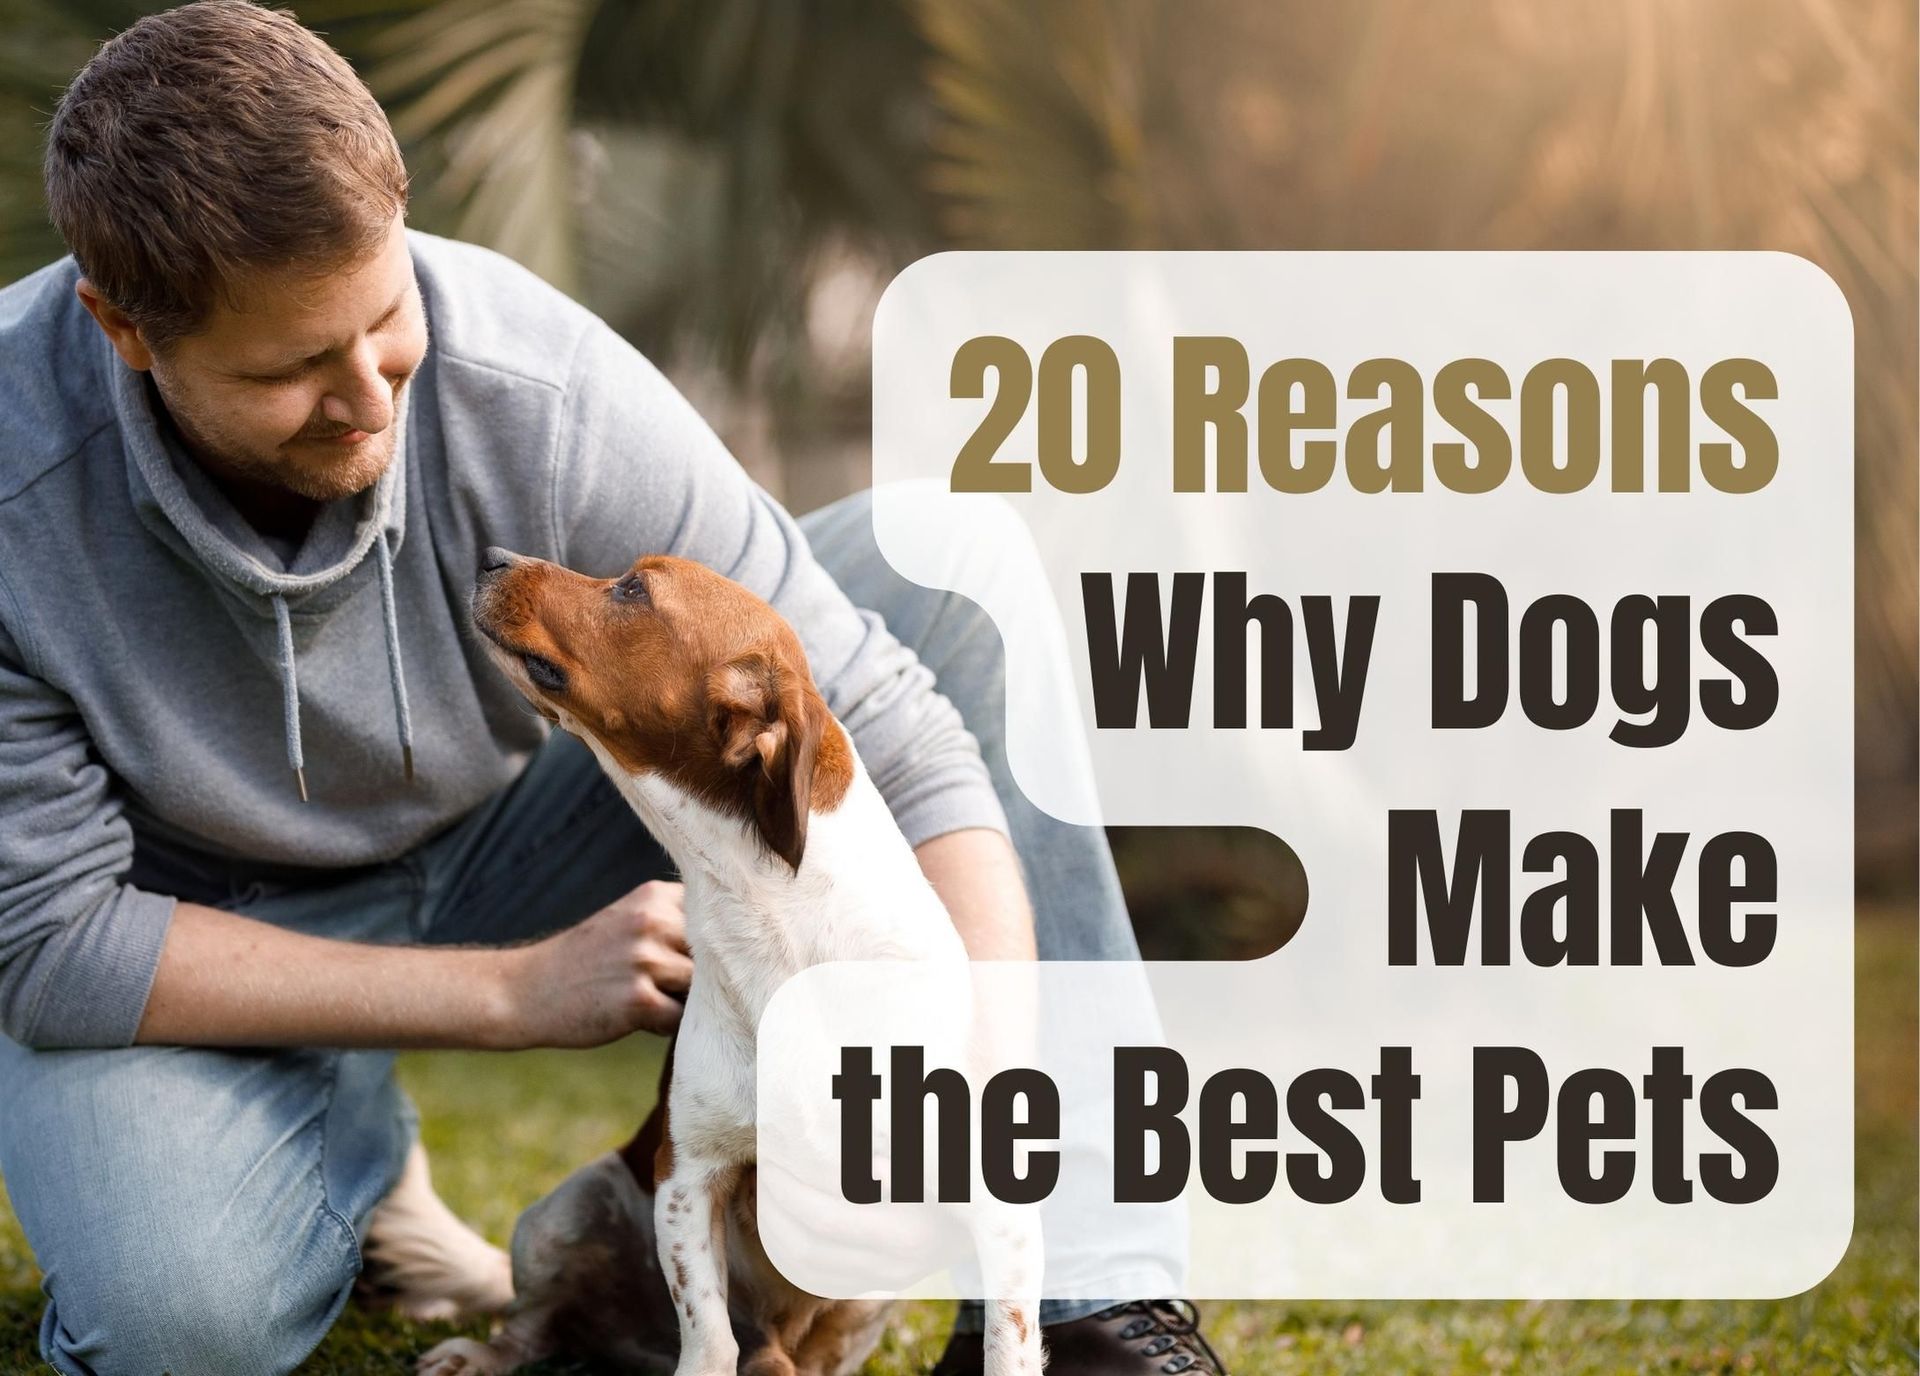 20-reasons-dogs-are-the-best-pets